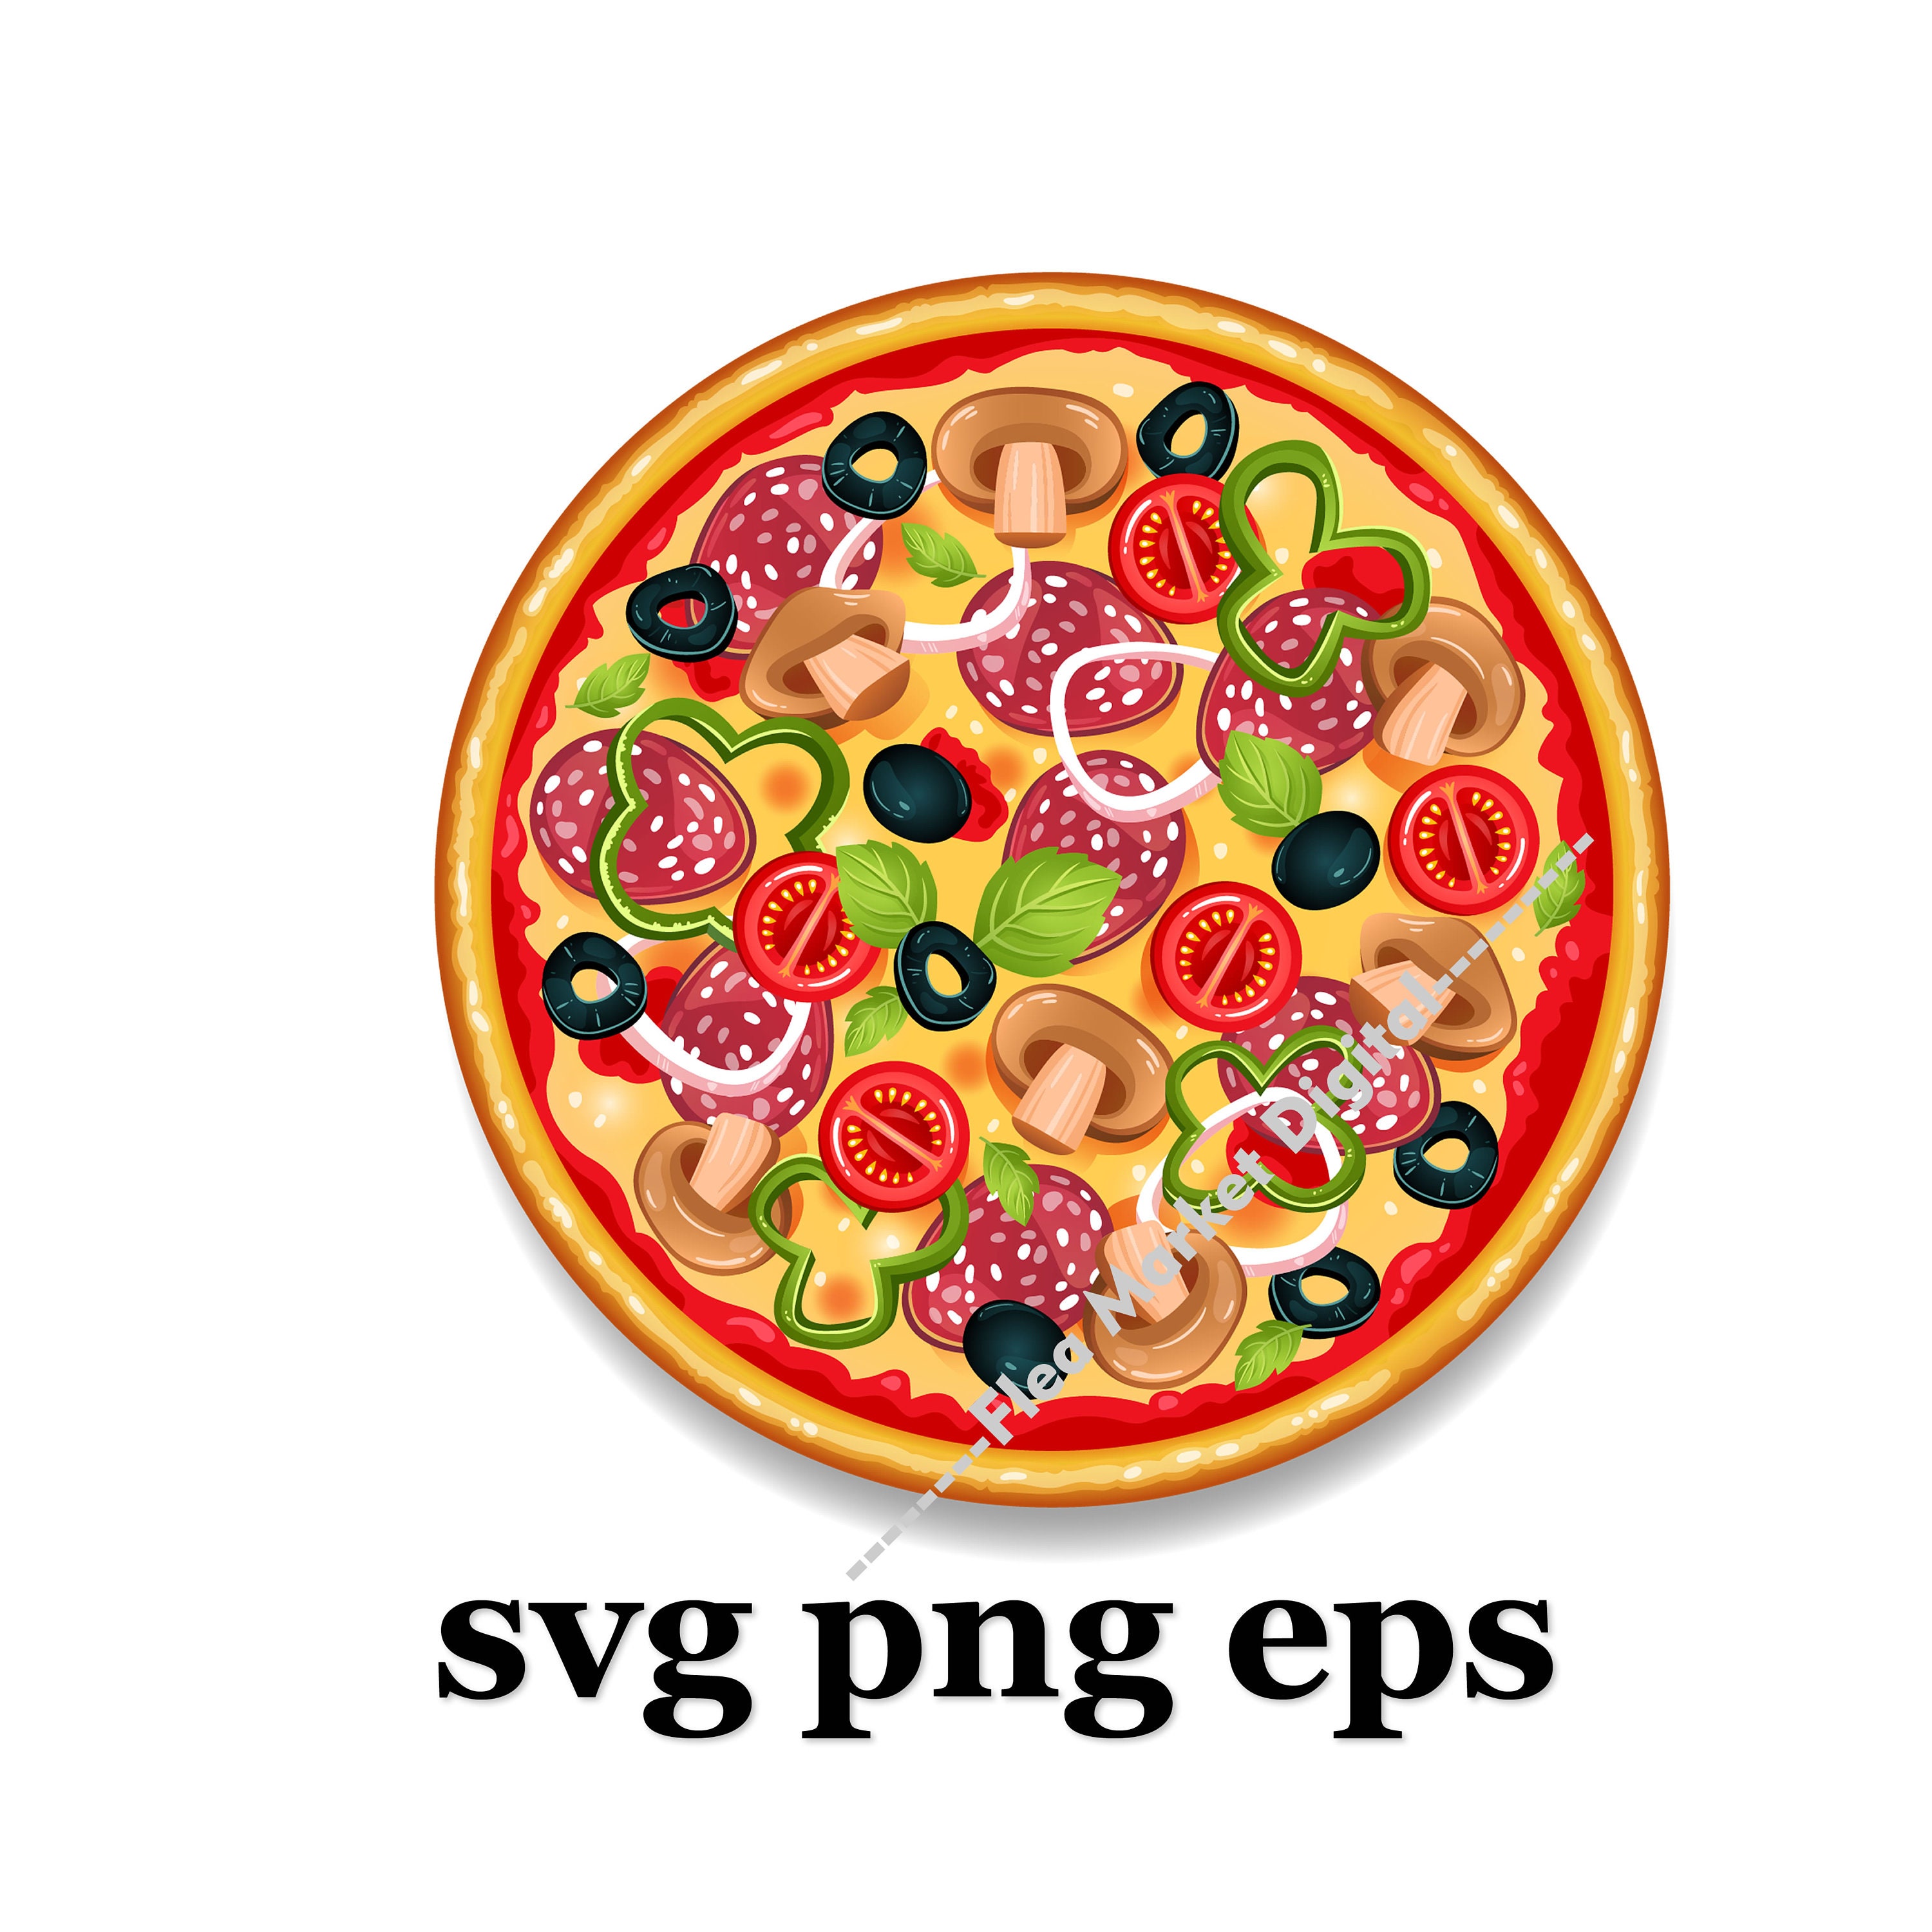 290 Brought Pizza Illustrations - Free in SVG, PNG, EPS - IconScout